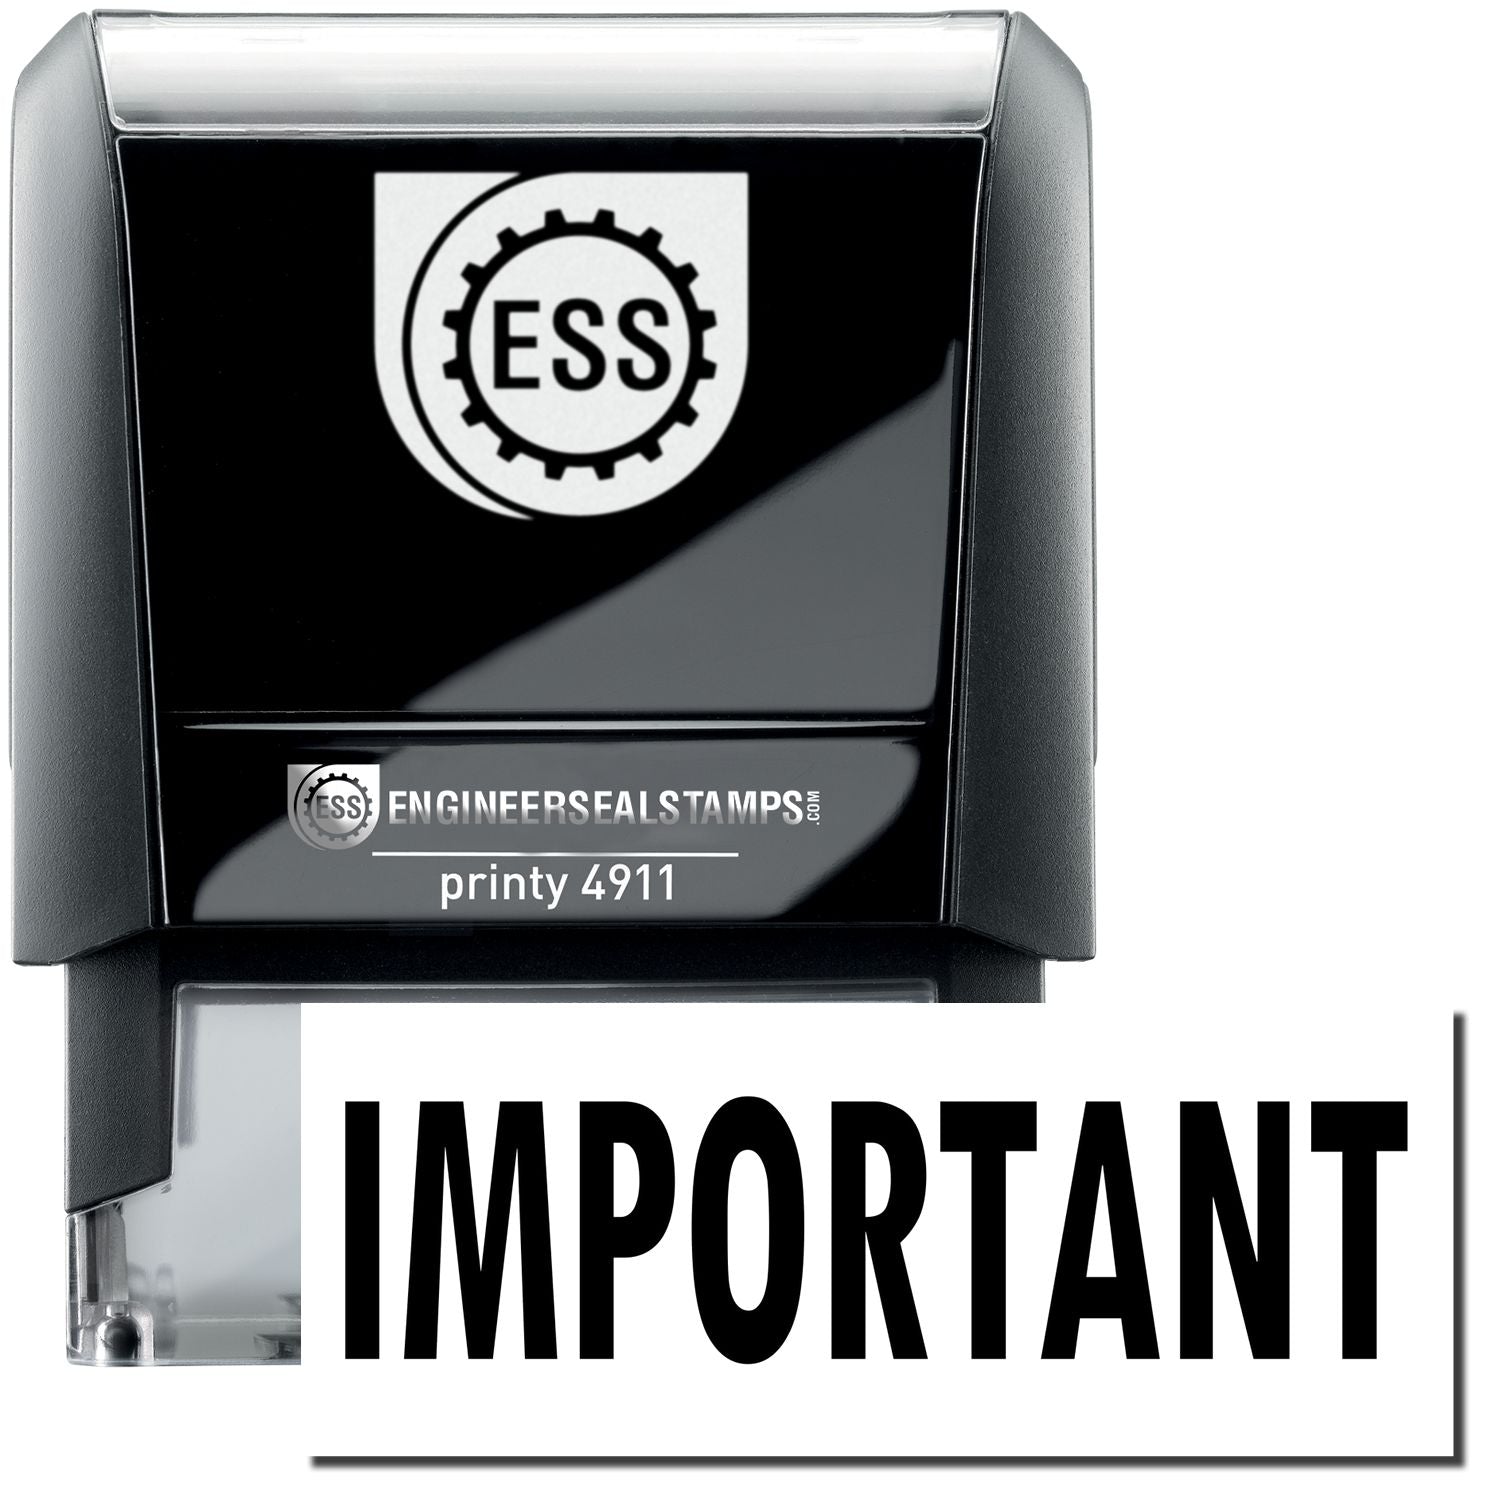 A self-inking stamp with a stamped image showing how the text "IMPORTANT" is displayed after stamping.